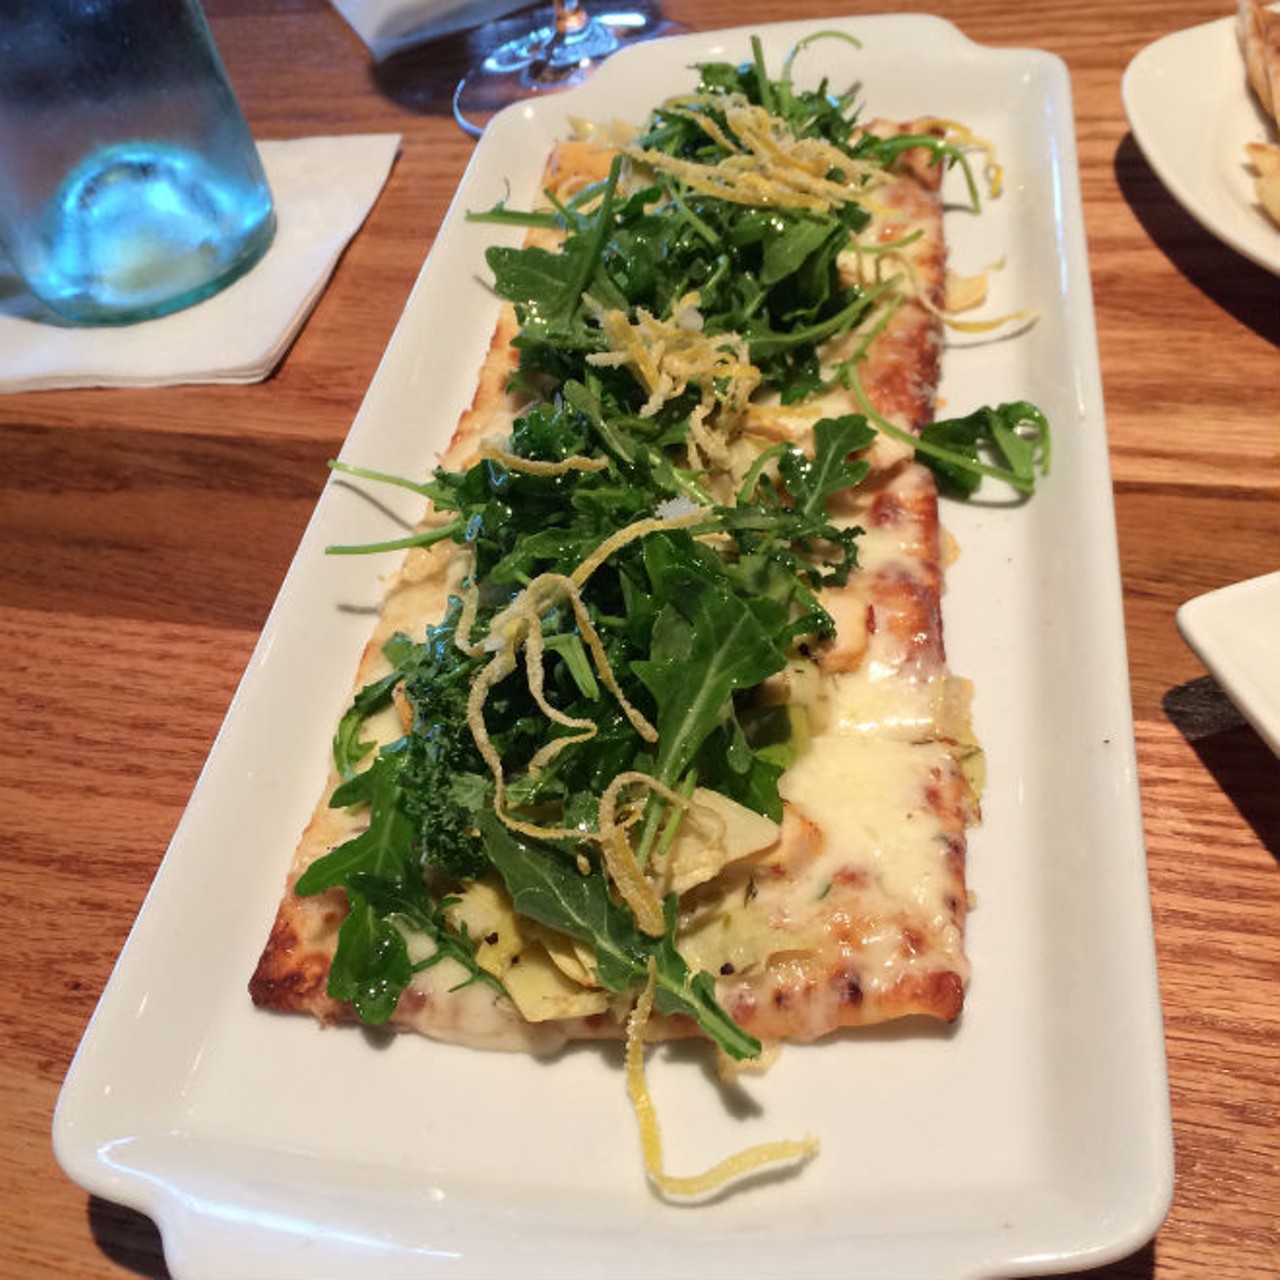 Chicken and artichoke flatbread topped with arugula and candied lemon zest from Carmel Caf&eacute;